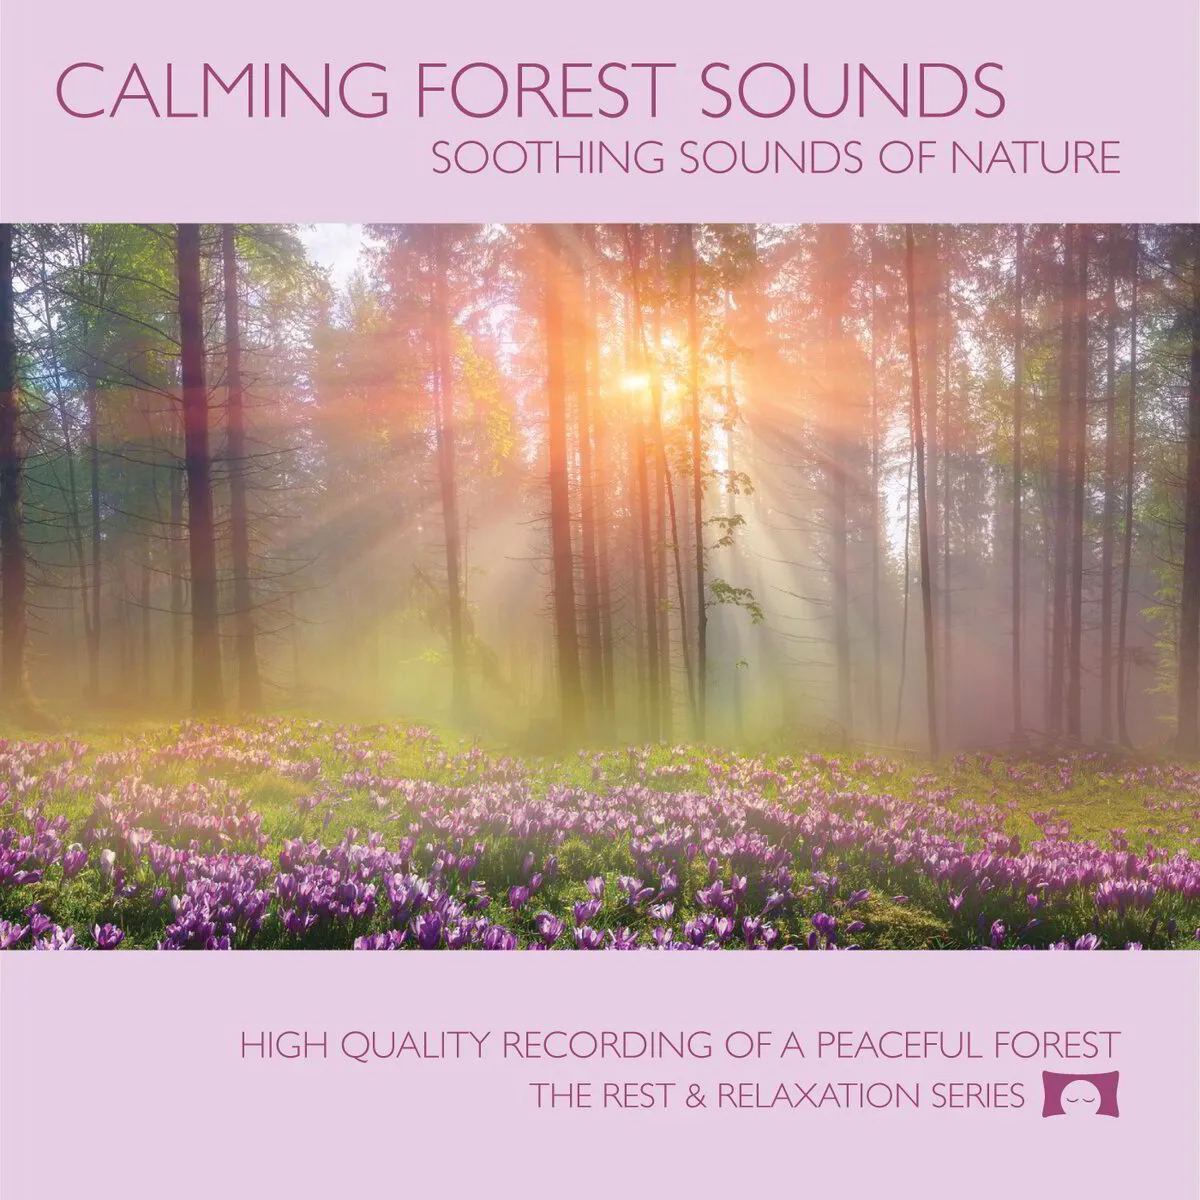 Calming Forest Sounds - Nature Sound Recording - Physical CD